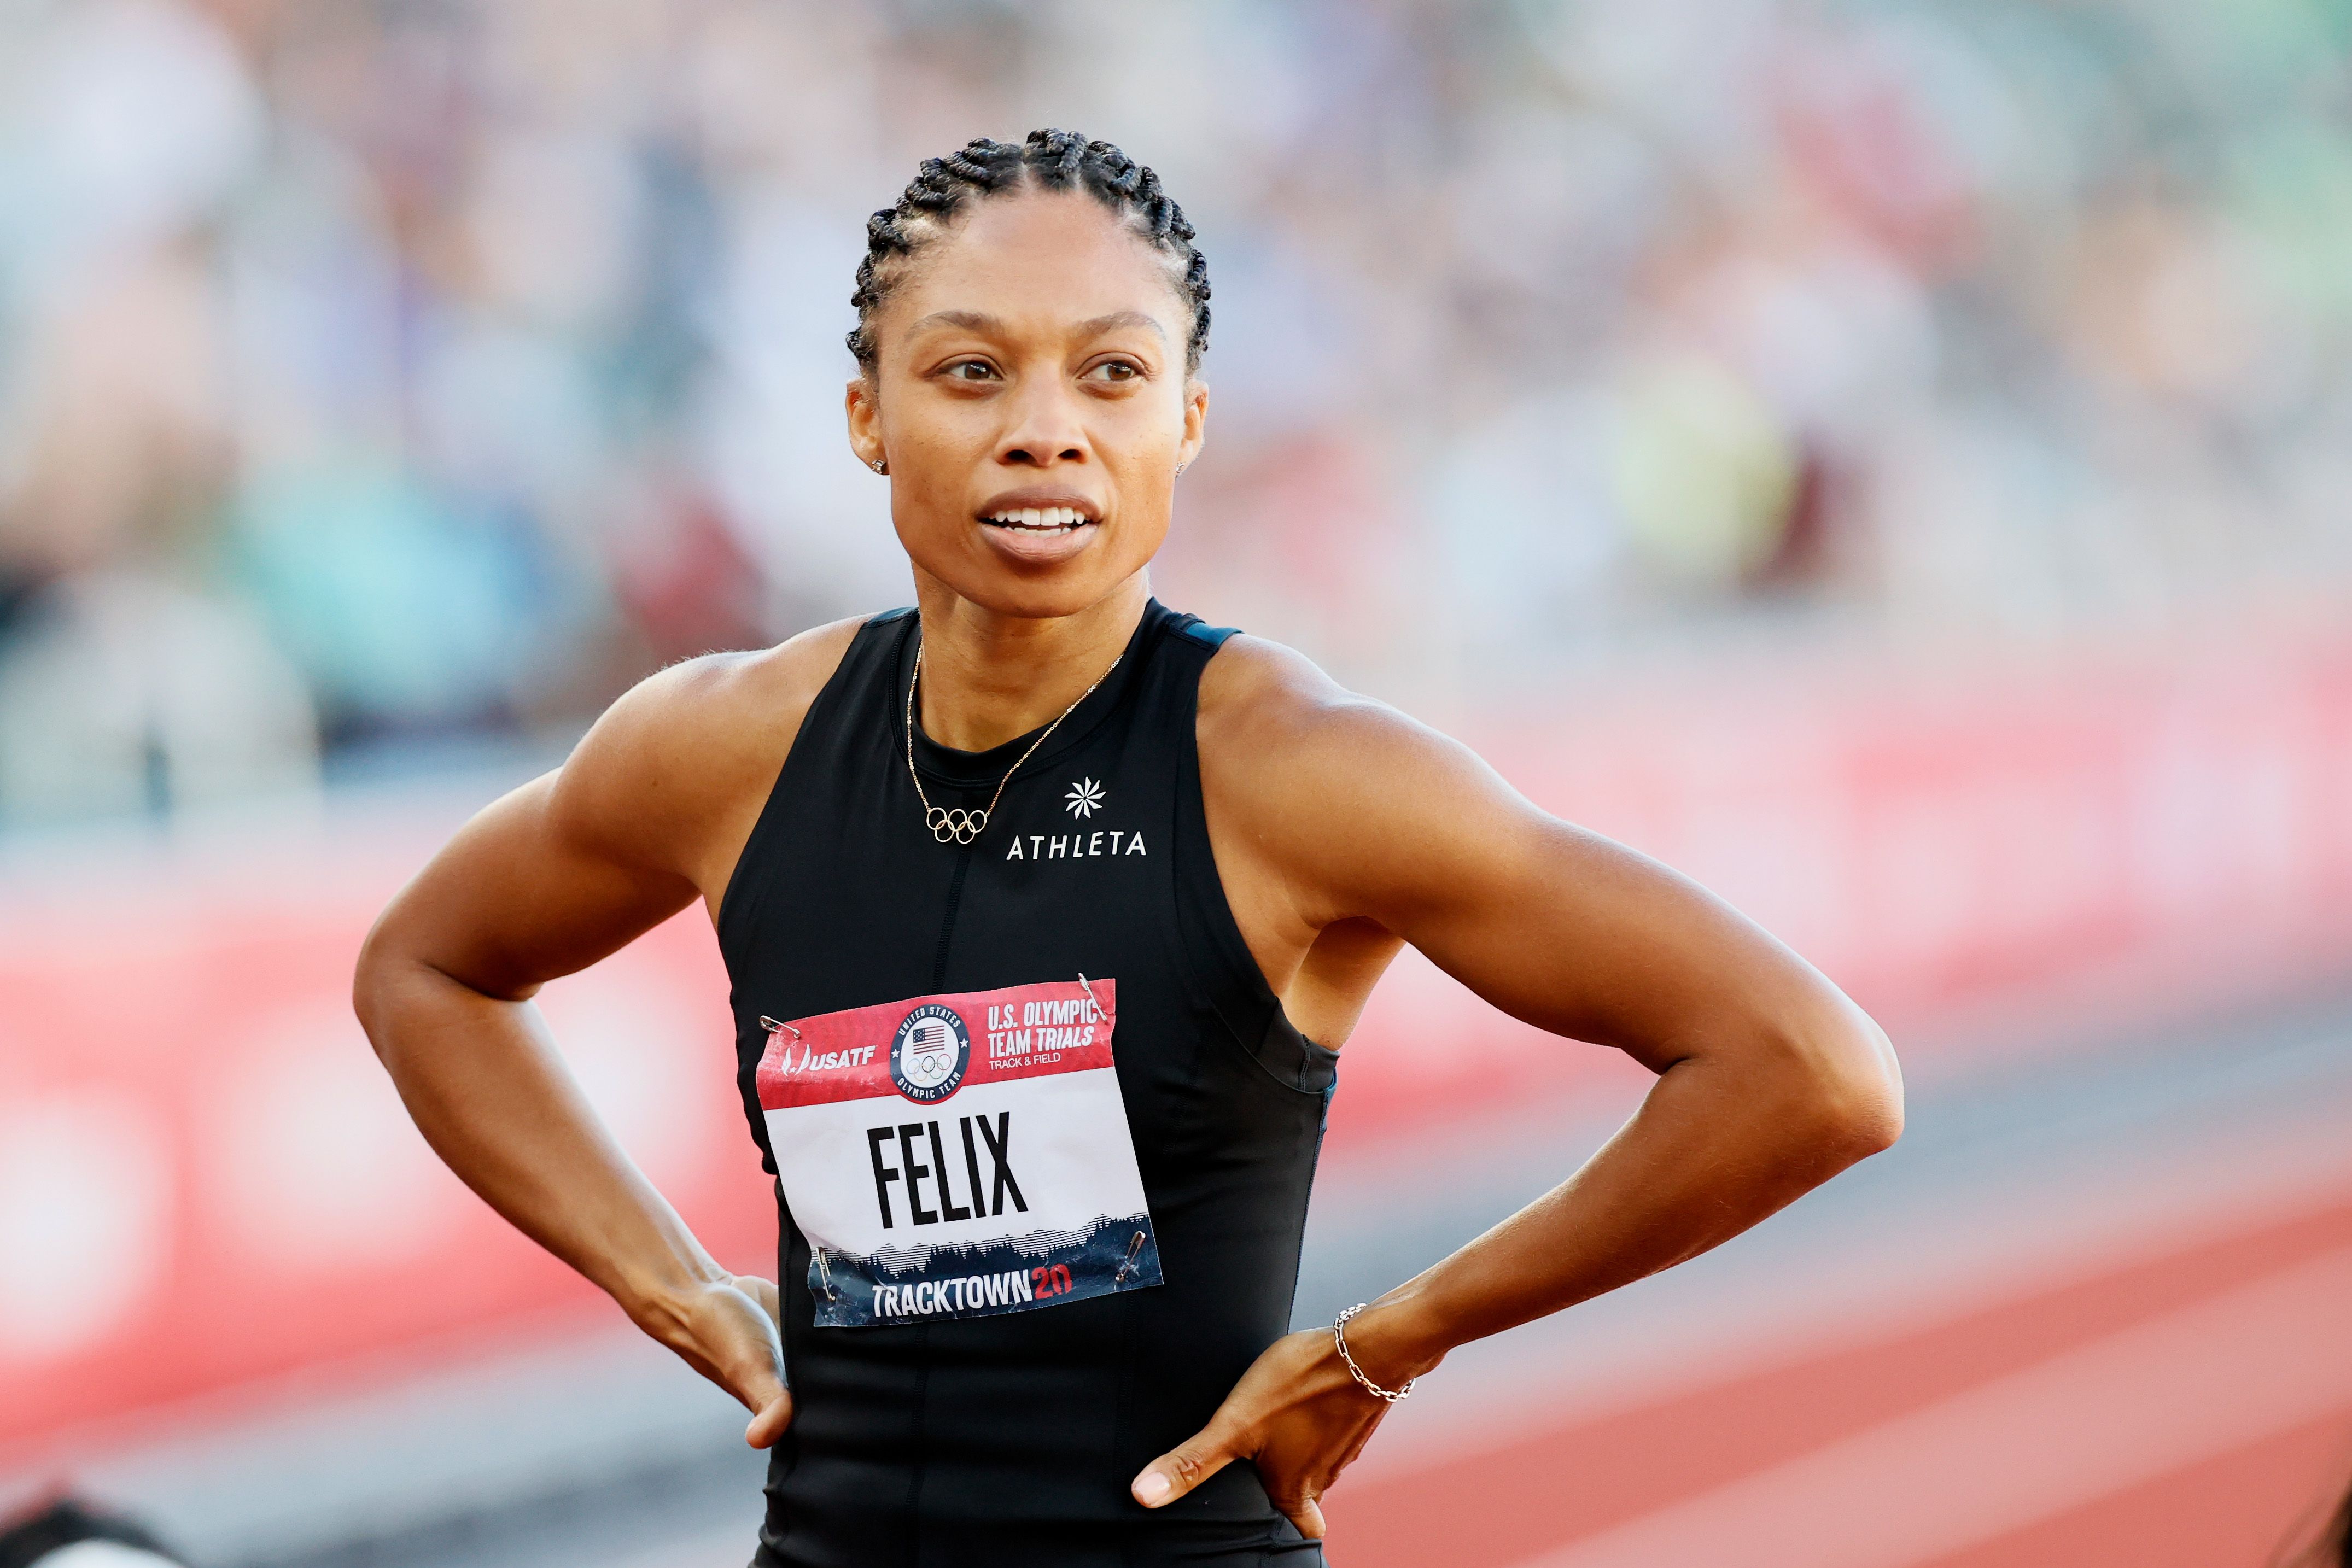 Allyson Felix and Athleta Partner With &Mother to Bring Childcare